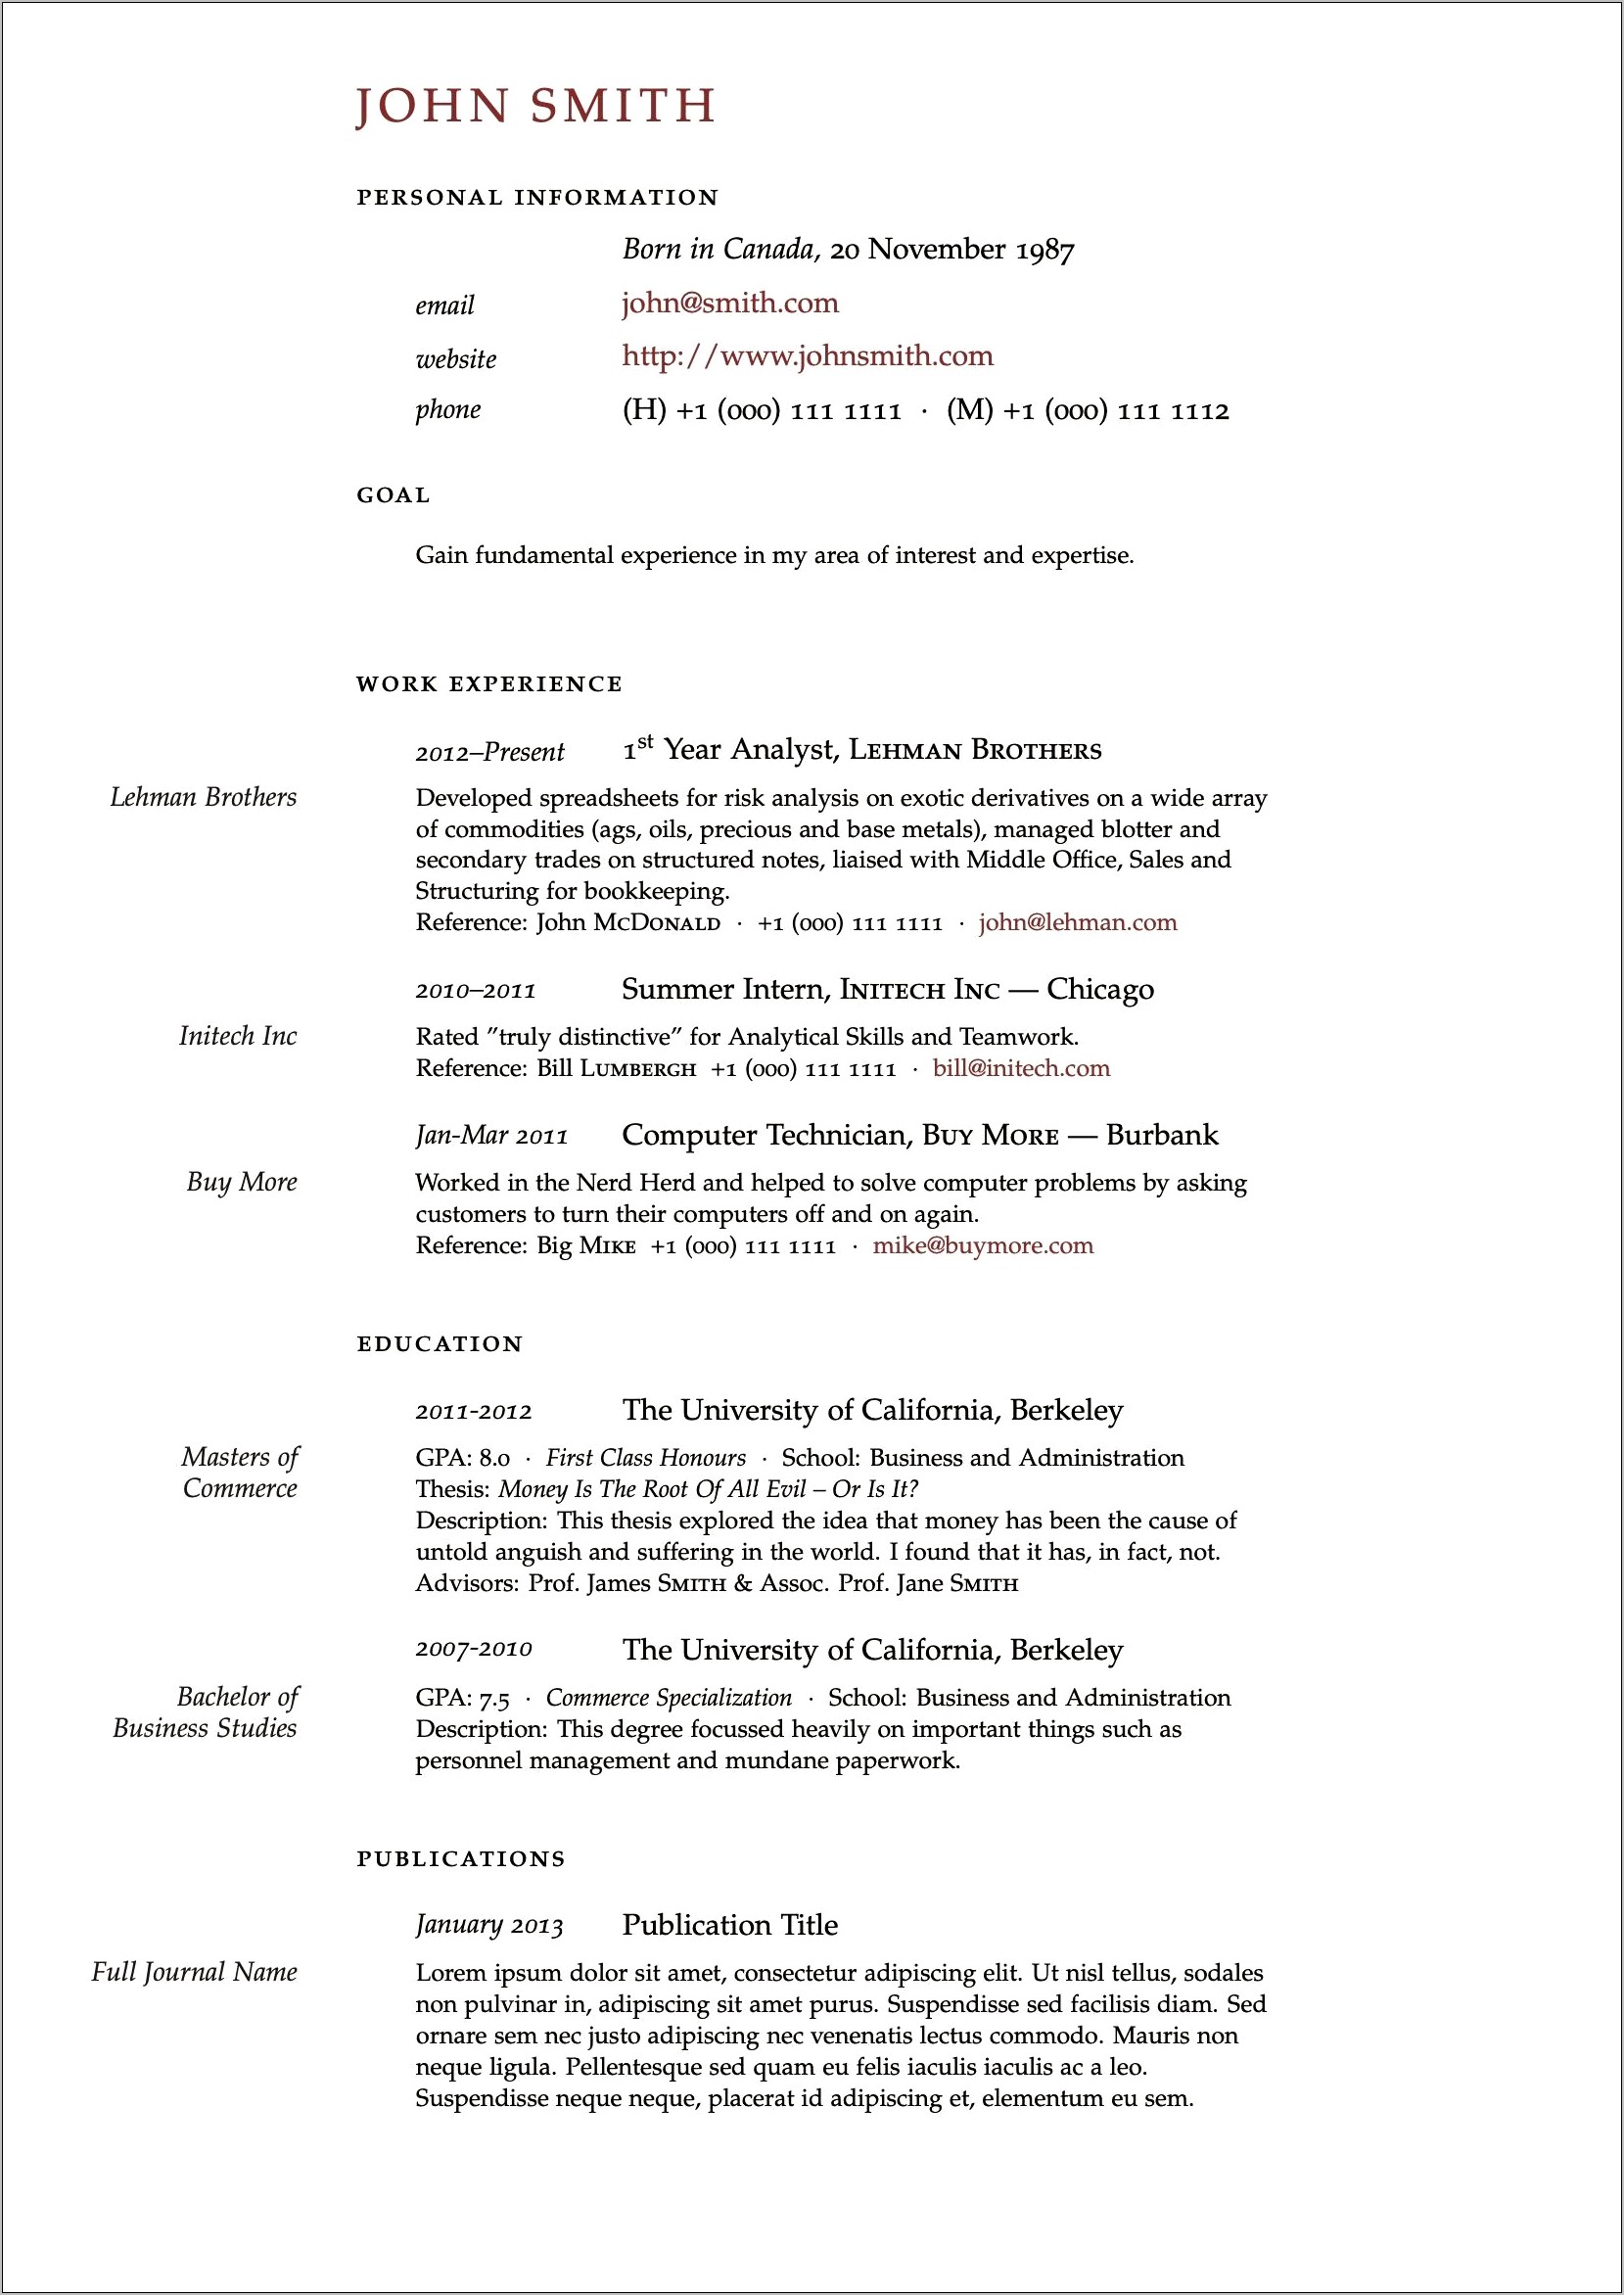 Sample Resume With Two Degrees